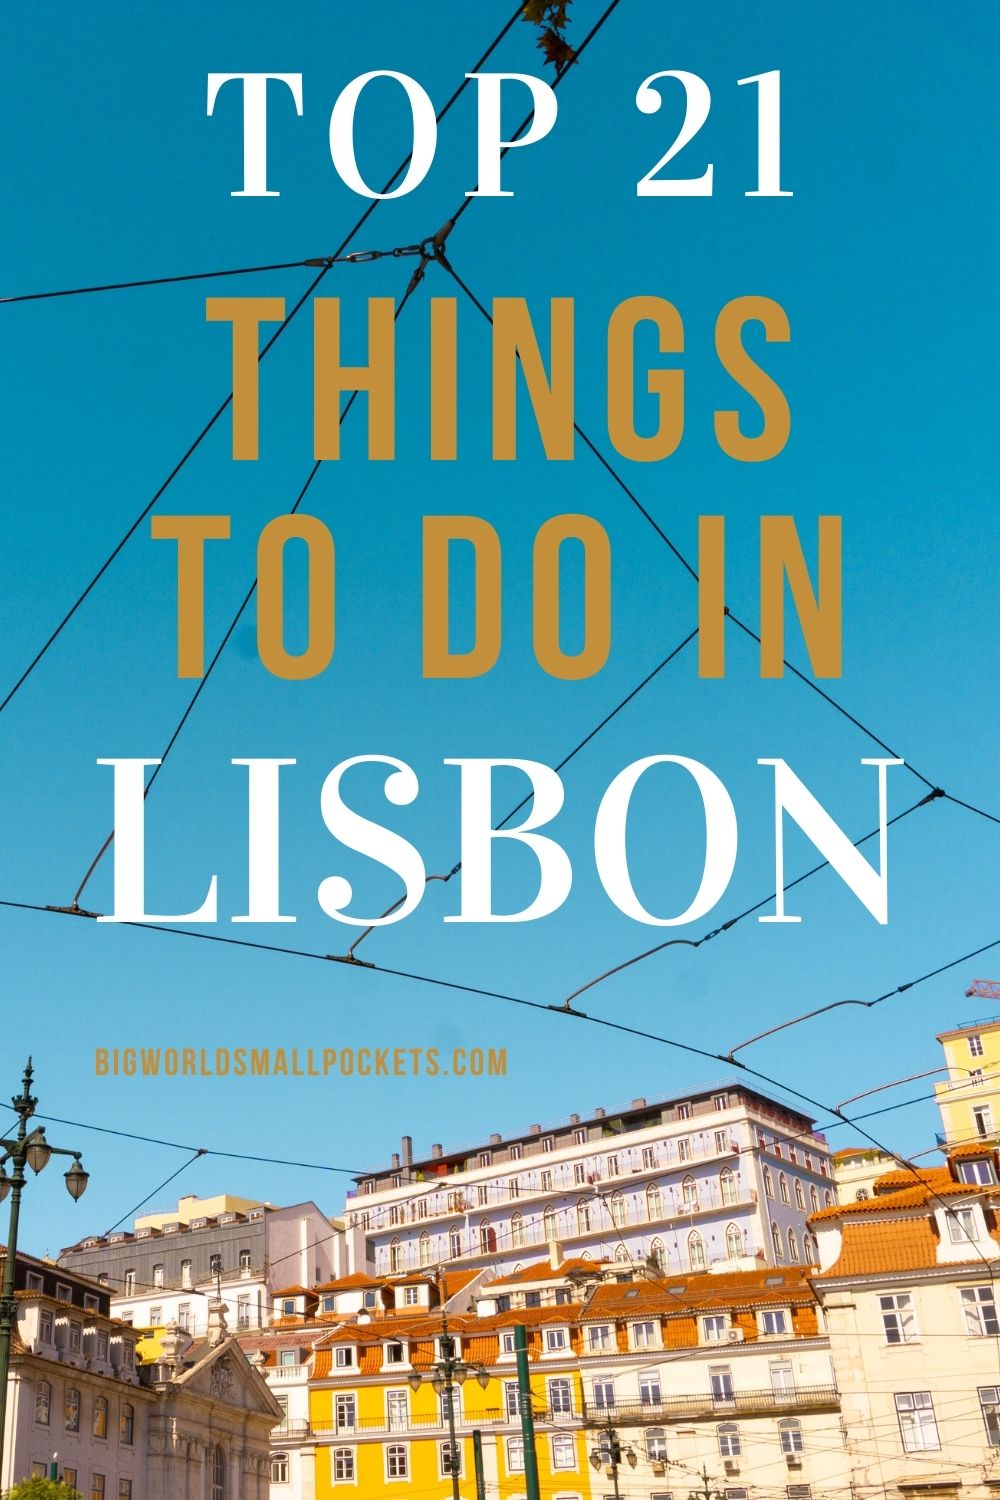 Top 21 Things to Do in Lisbon, Portugal